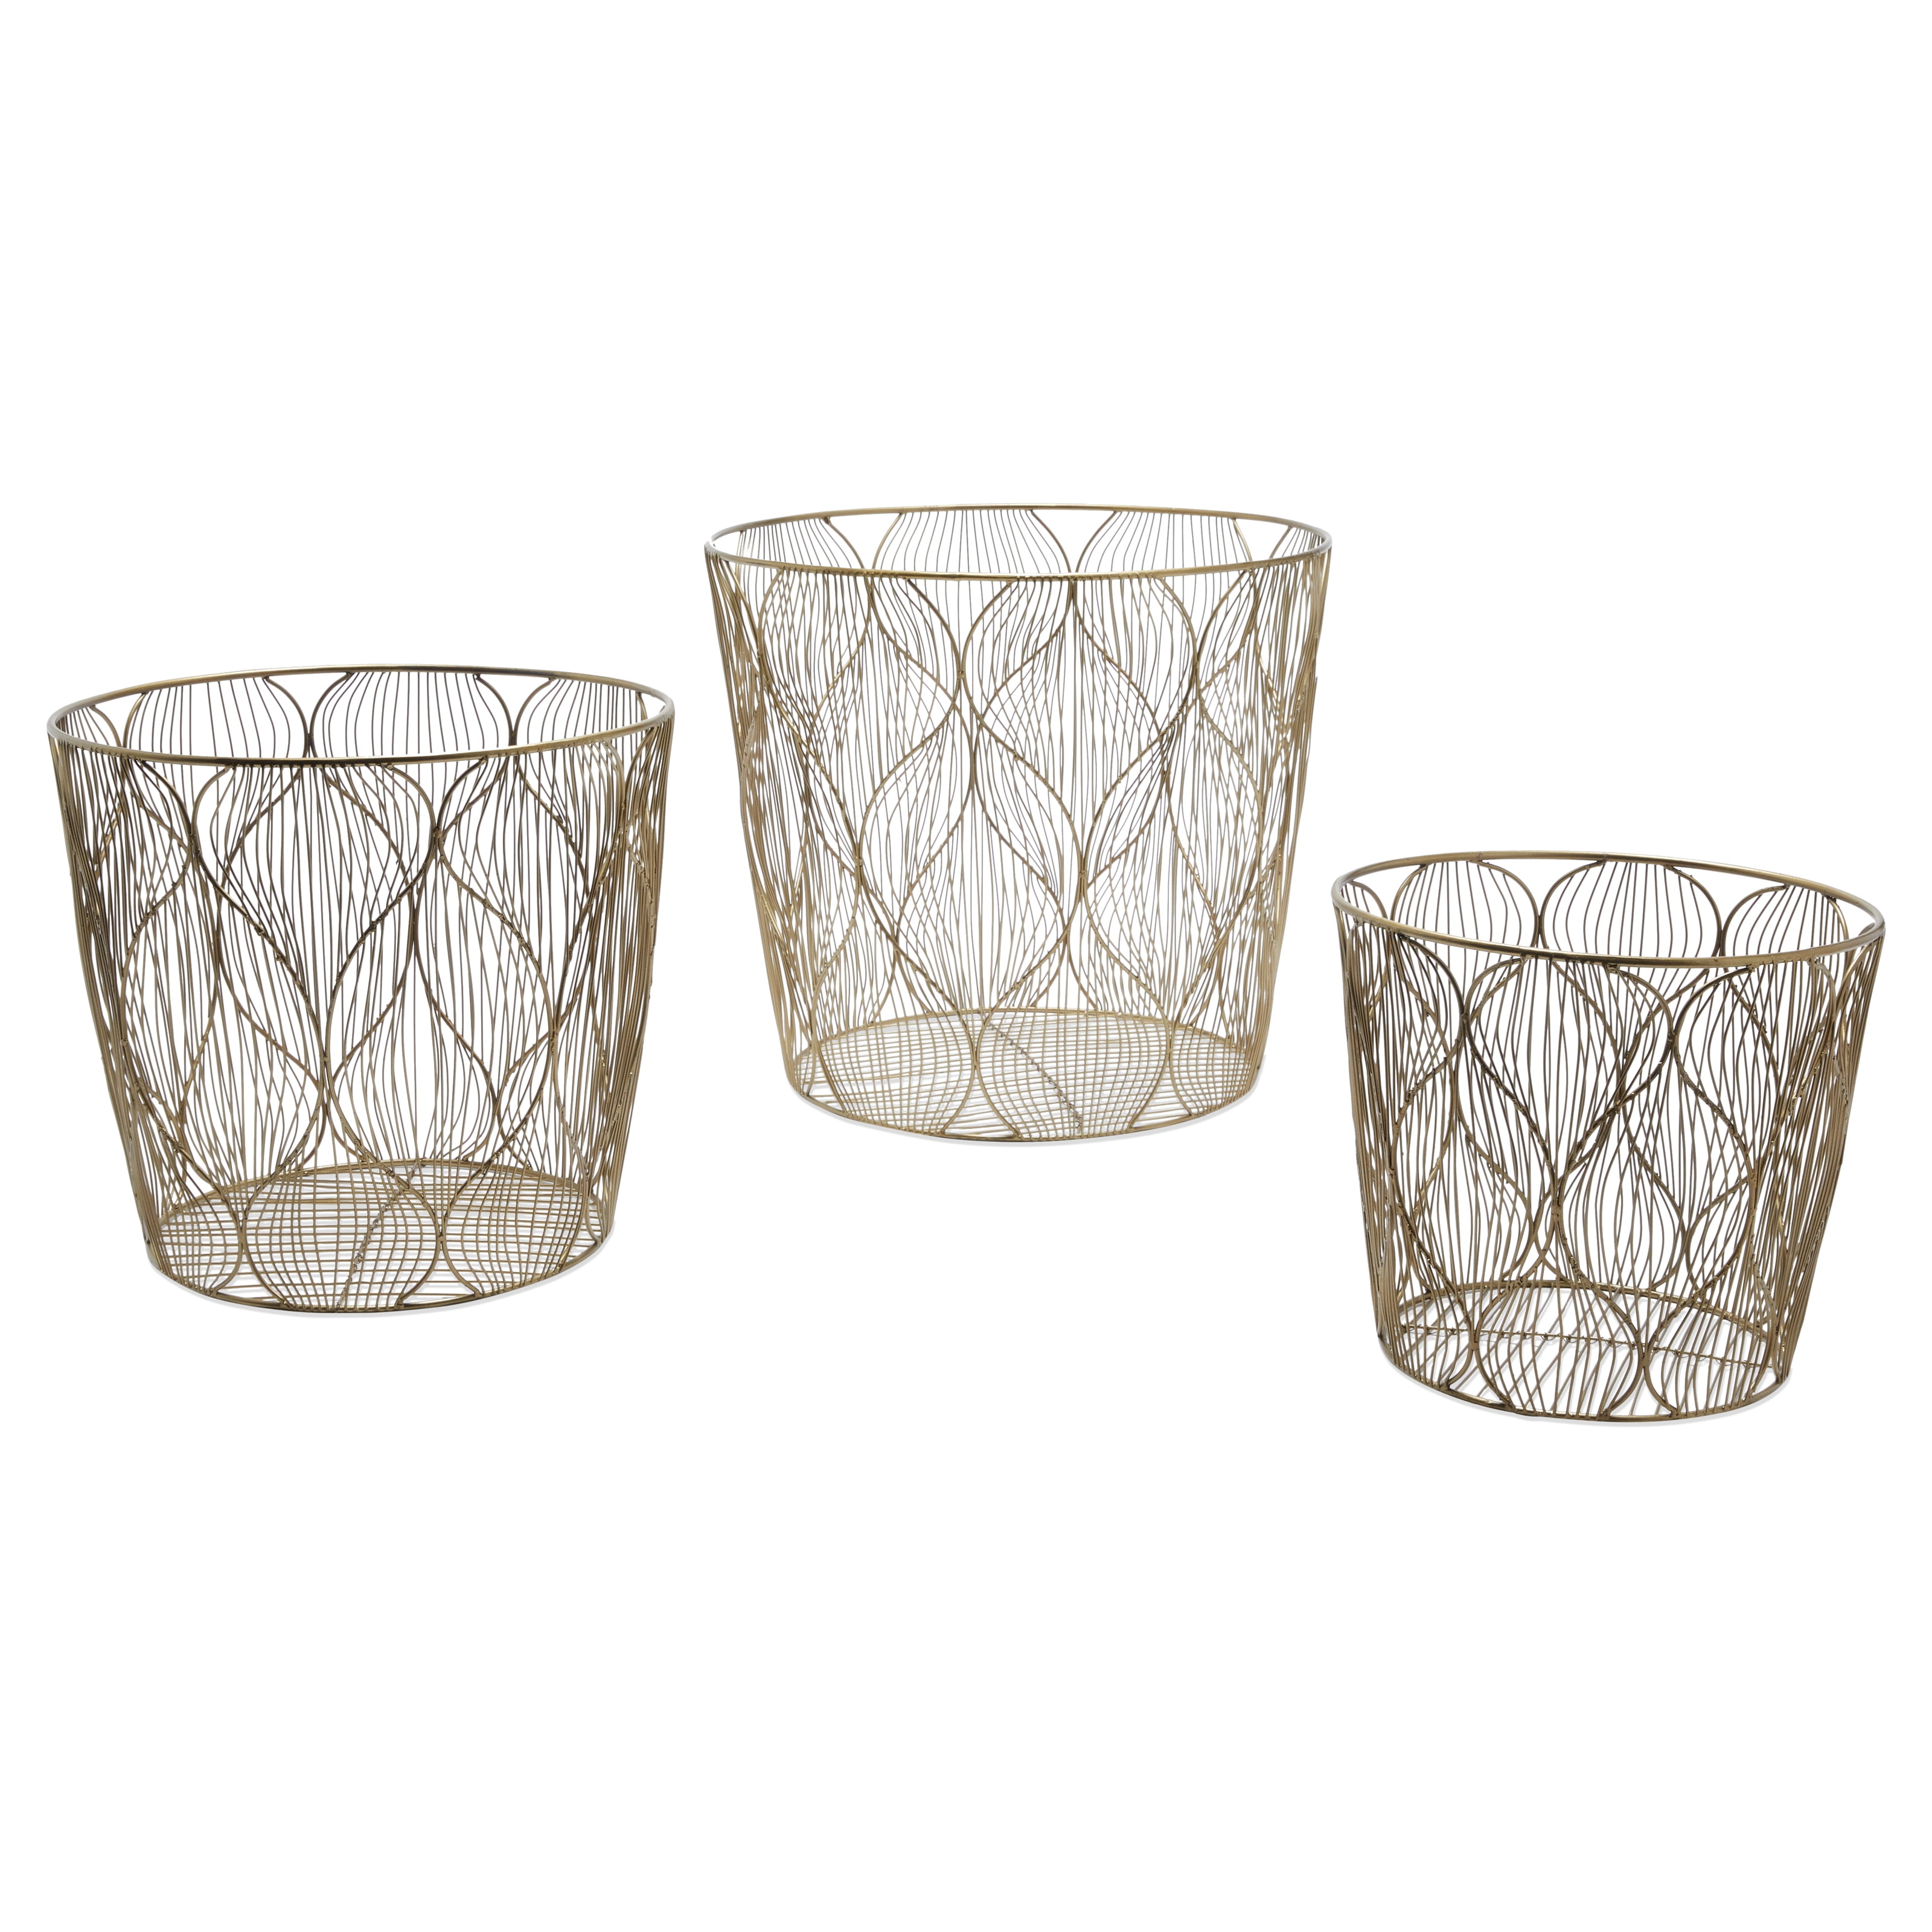 Set of 3 beaded baskets BACK IN STOCK